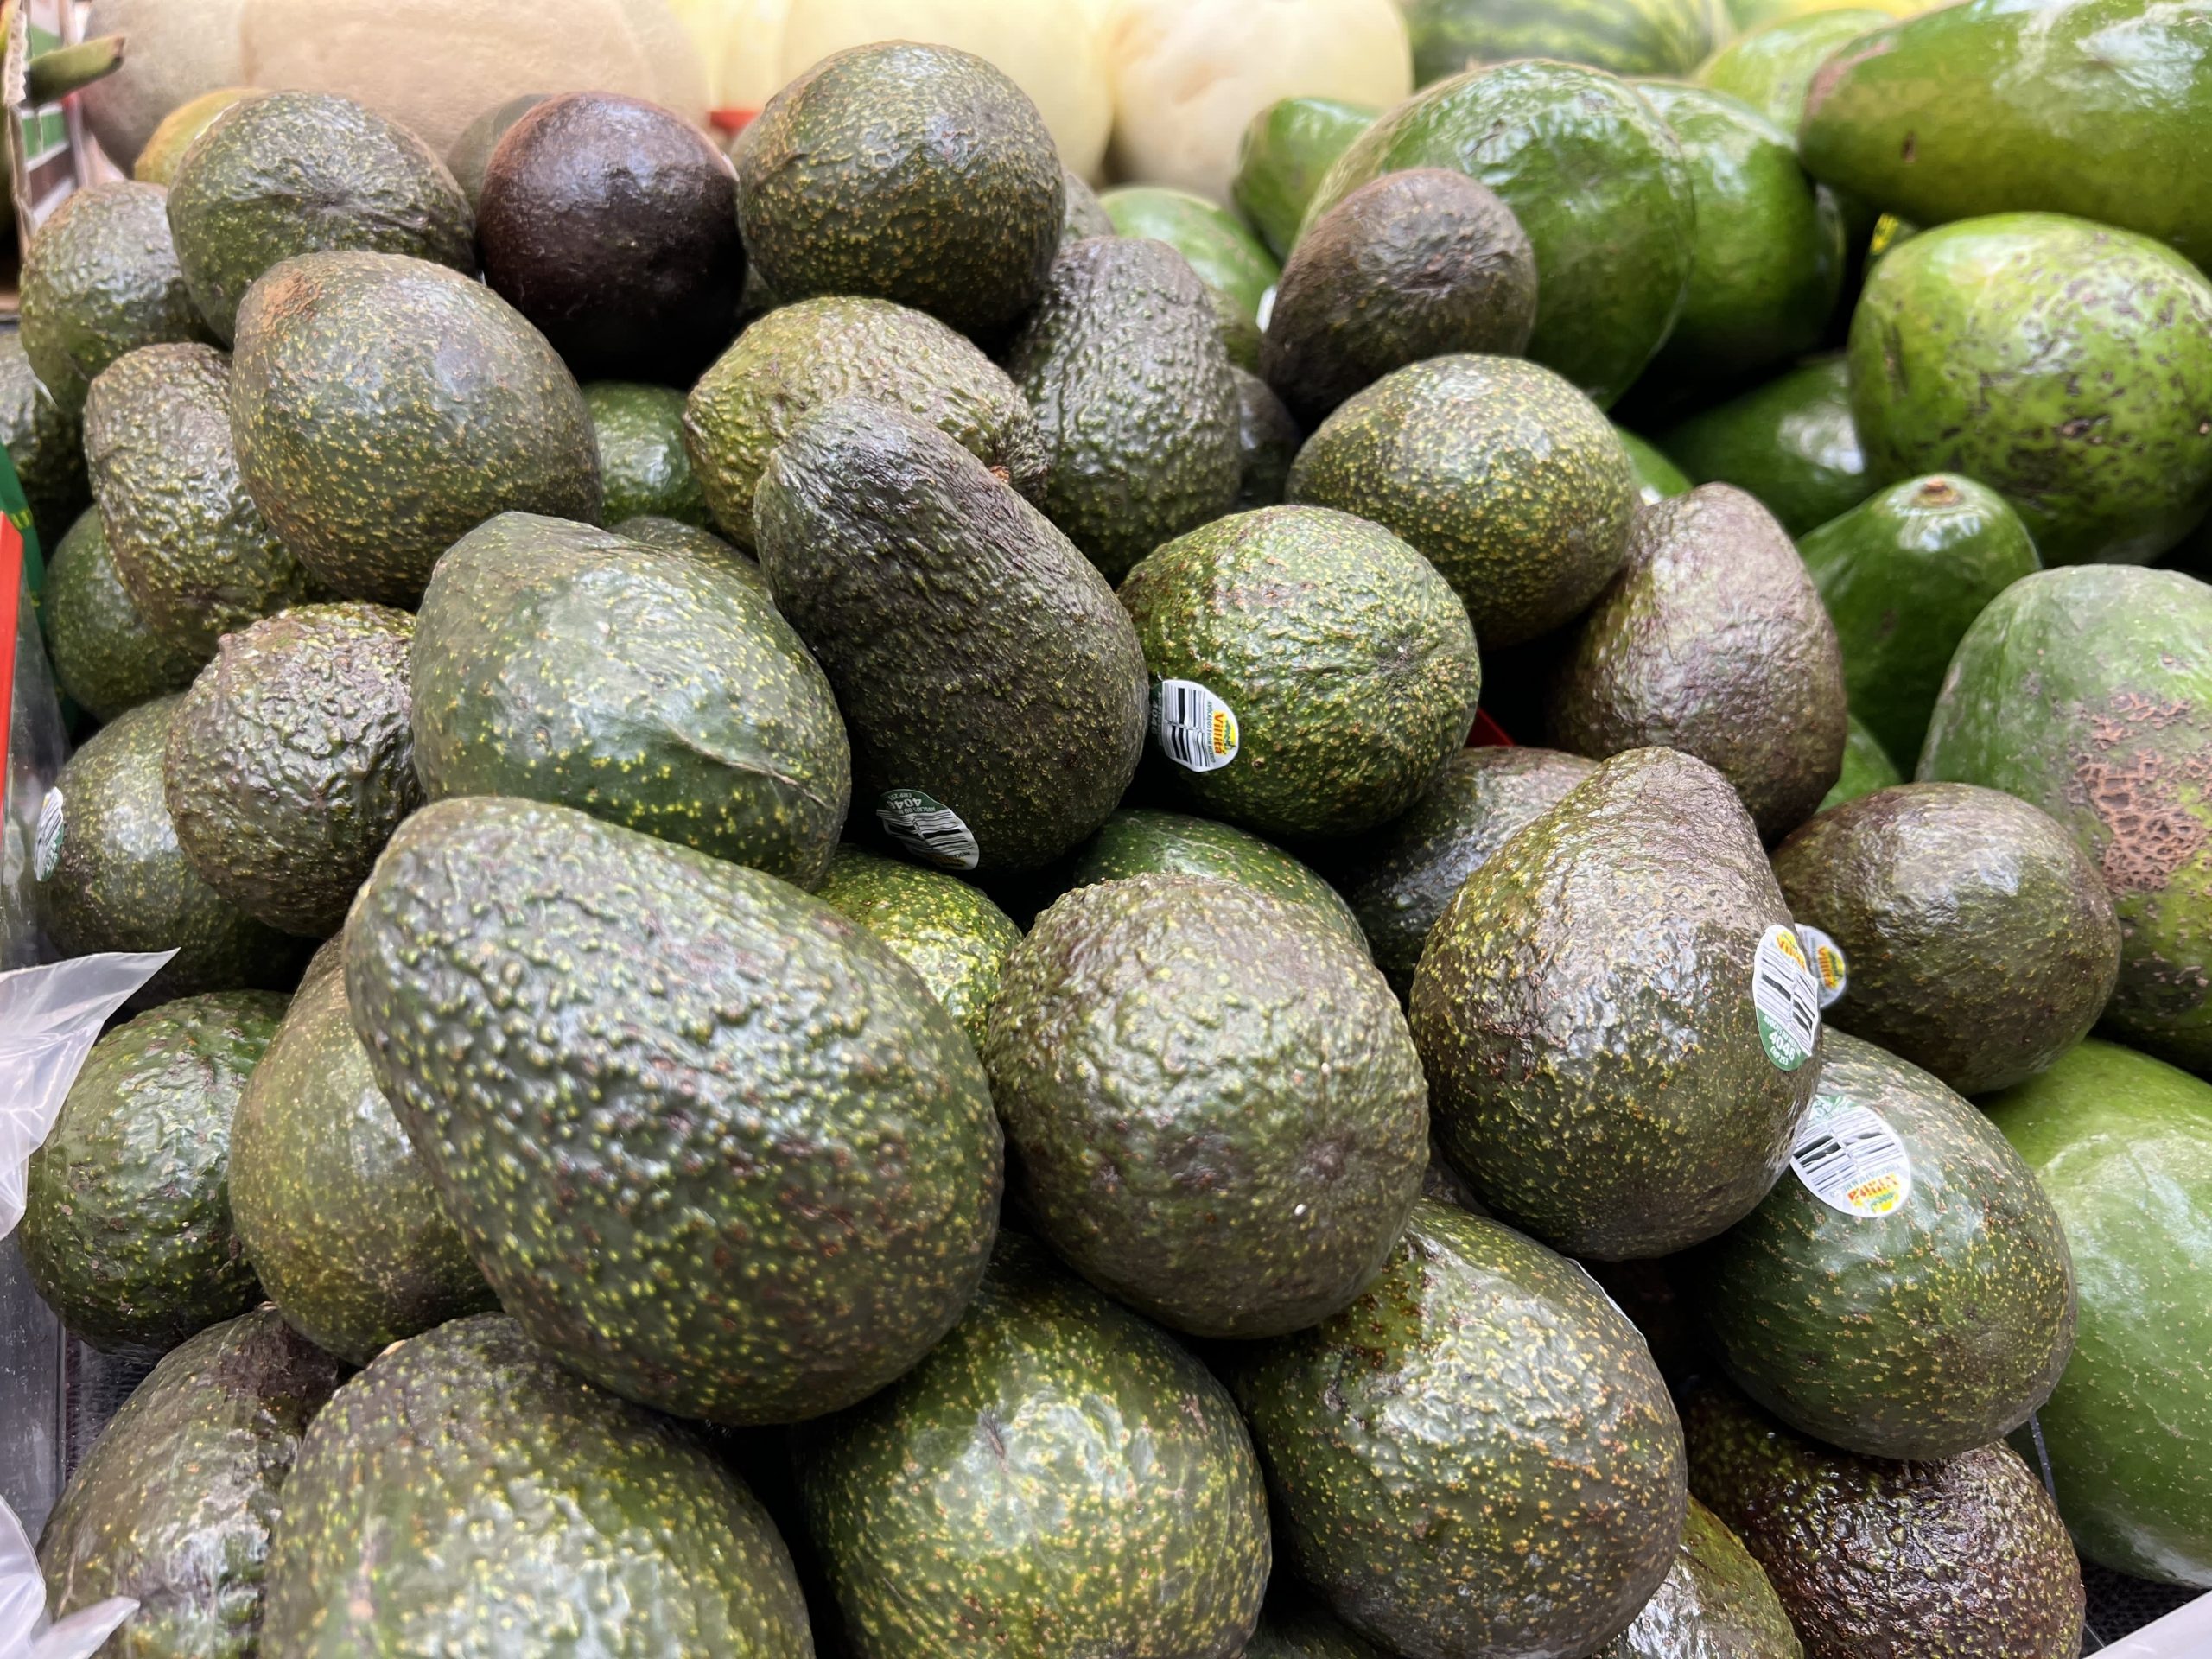 Avocados will likely be more expensive due to Mexican import suspension